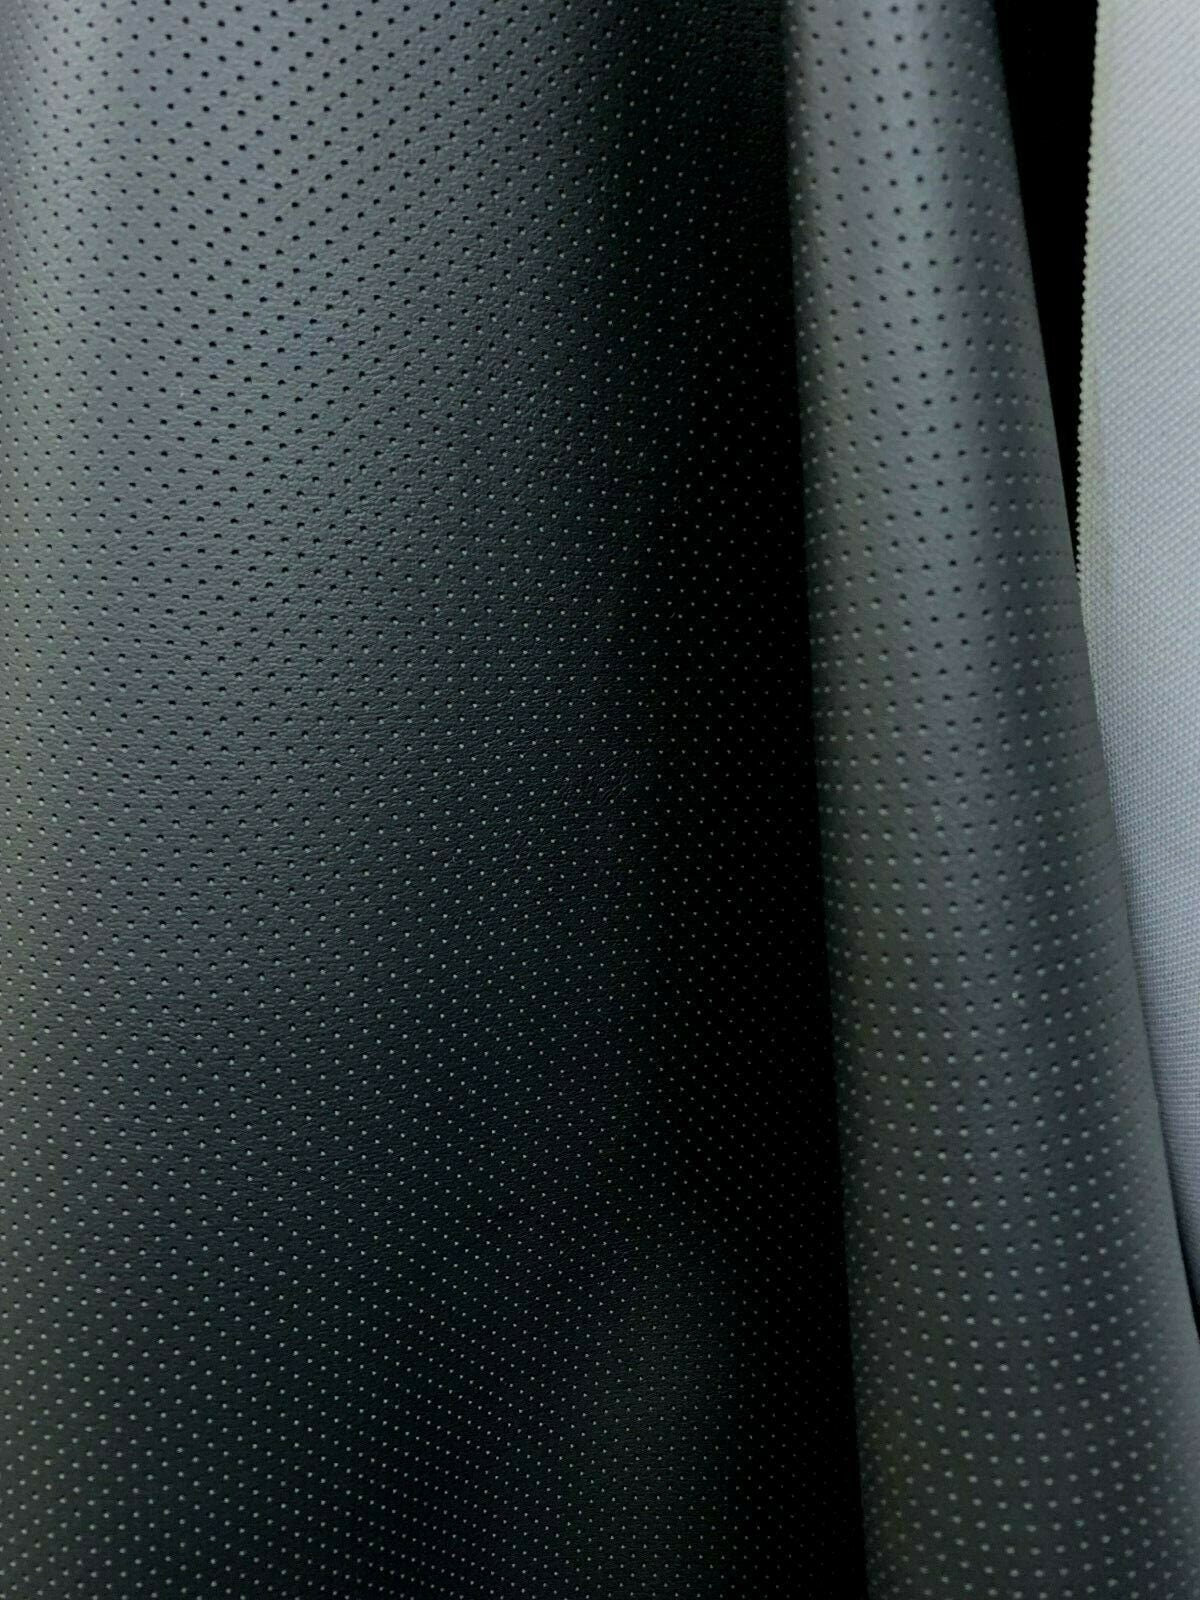 BLACK Perforated Faux Leather Vinyl Upholstery Fabric (55 in.) Sold By The Yard